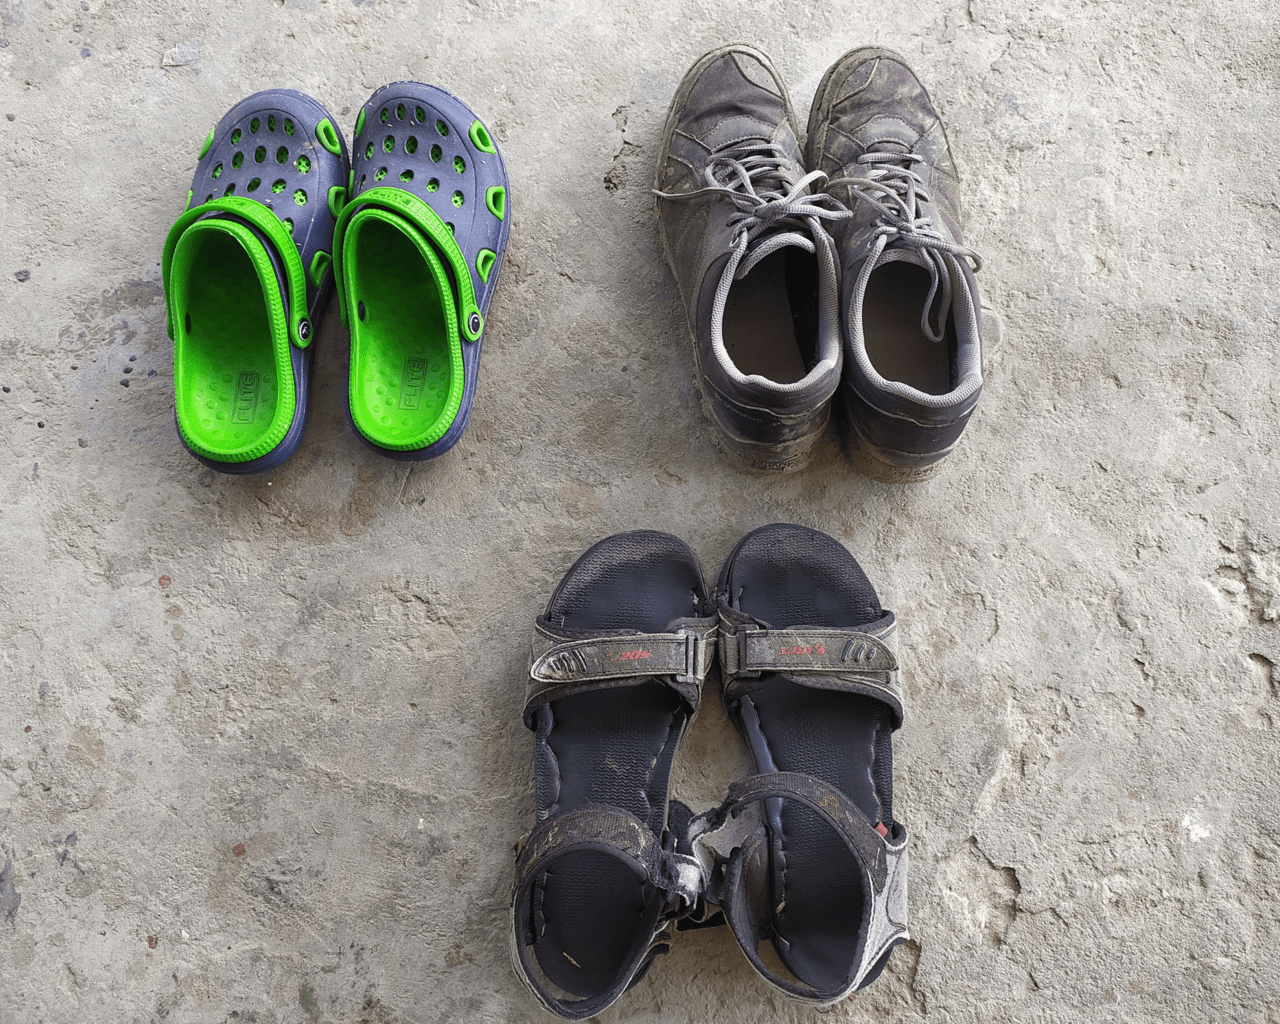 Footwear to carry for Spiti trip